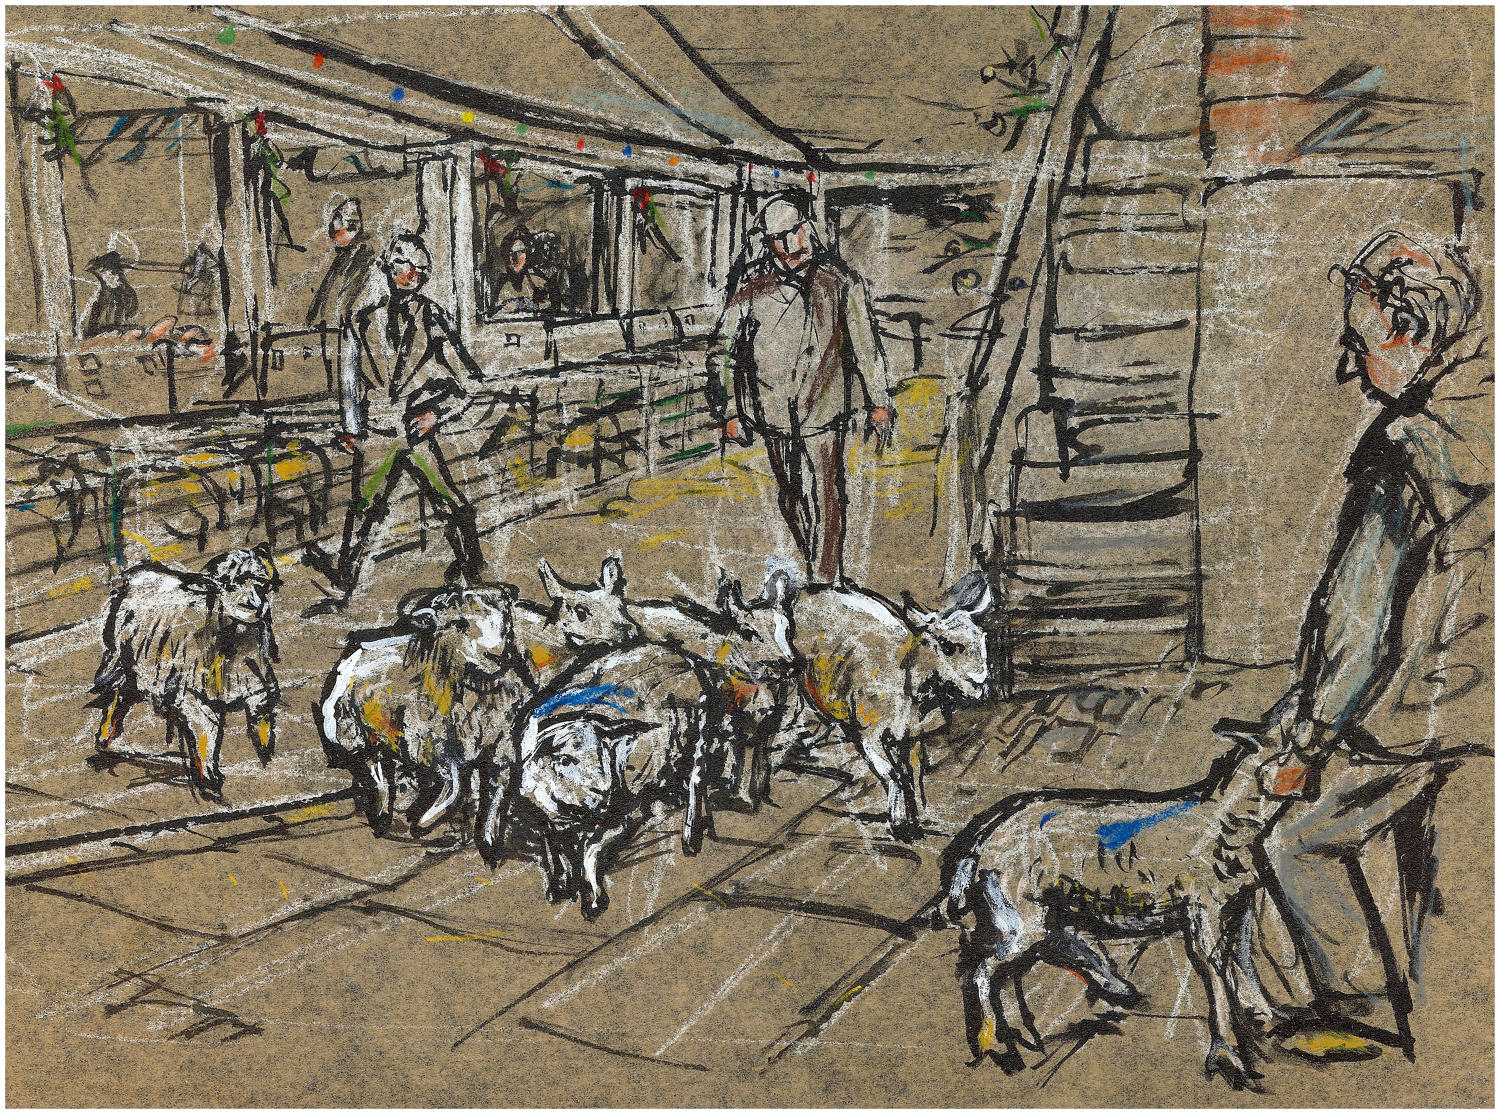 Artwork sheep in Old Market - THE EXIT - by Lys Flowerday Dartmouth